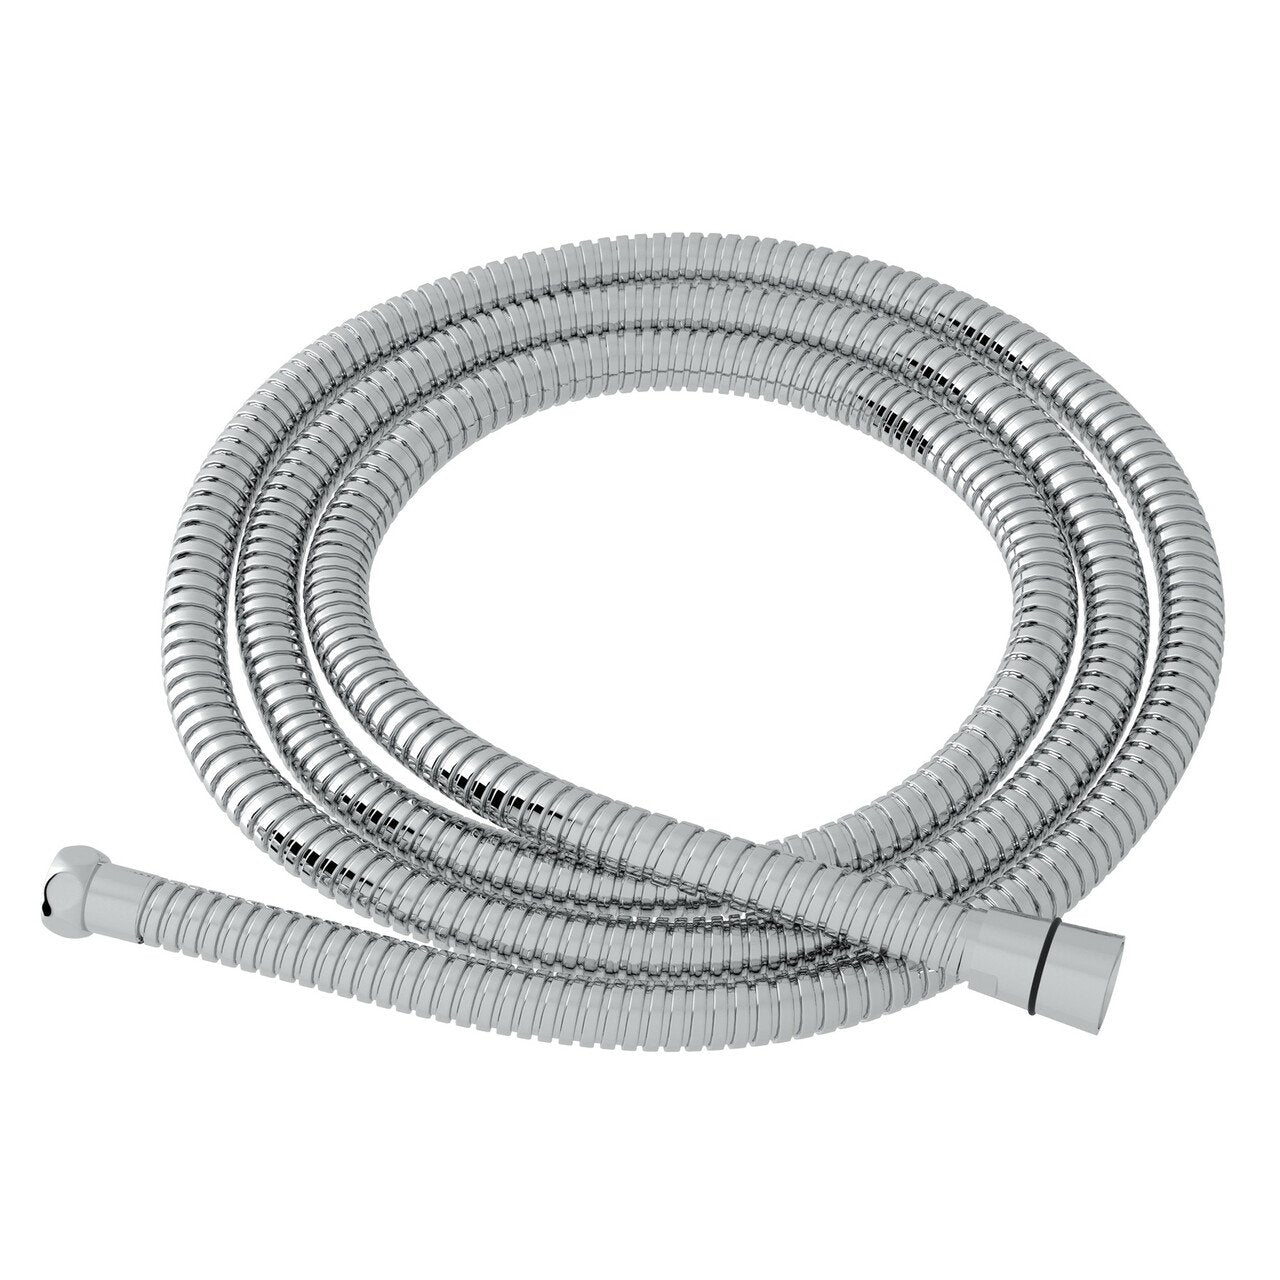 ROHL 59 Inch Metal Shower Hose Assembly - BNGBath